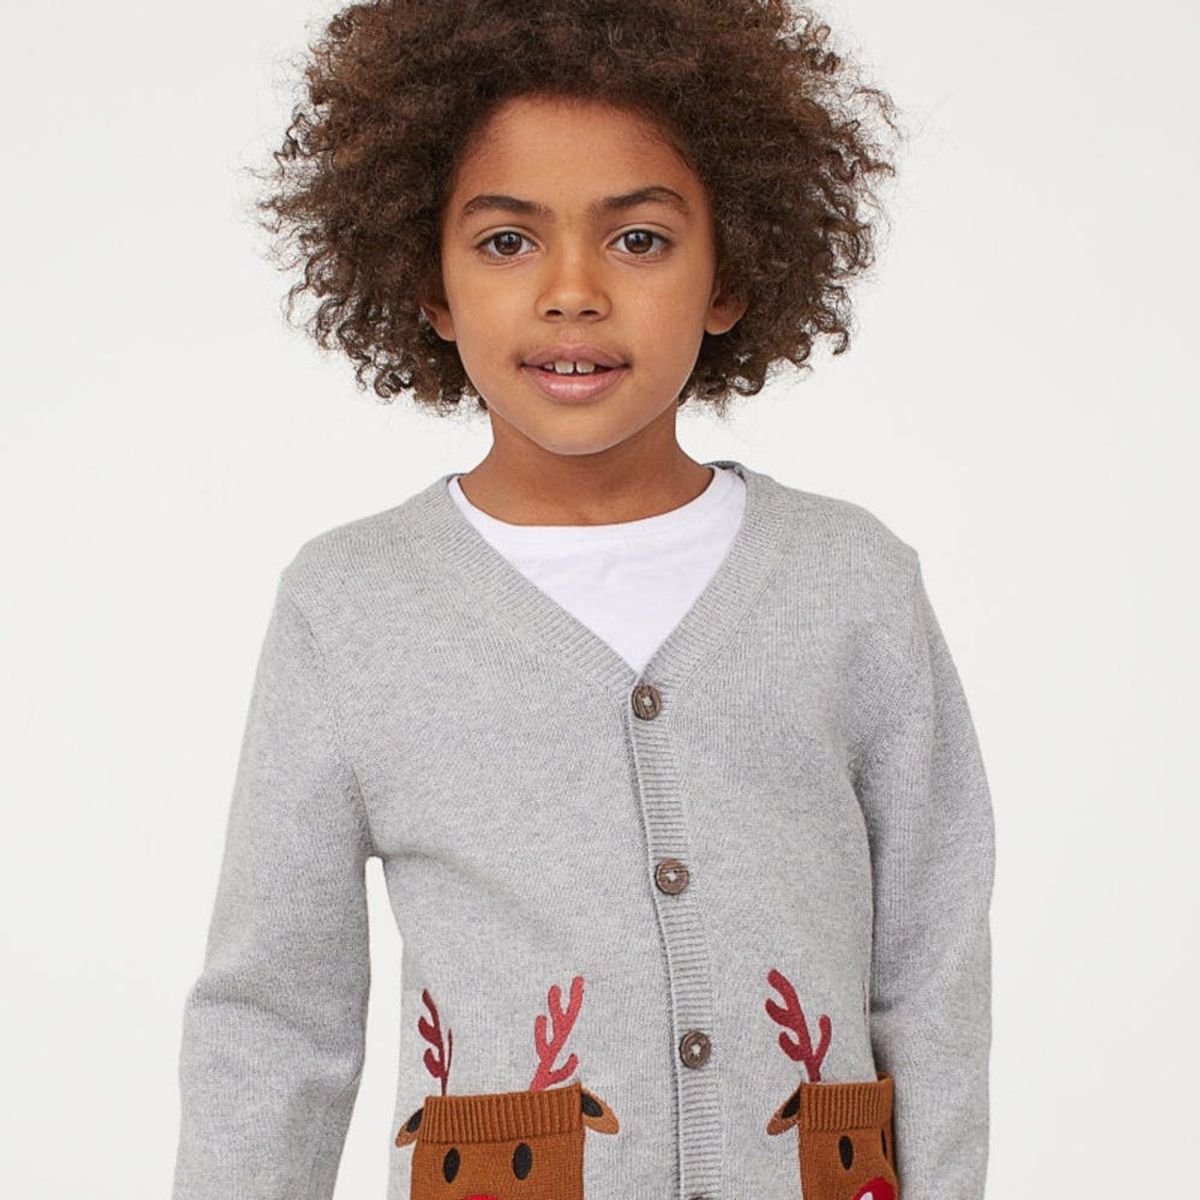 12 Adorable Holiday Outfits for Your Kids